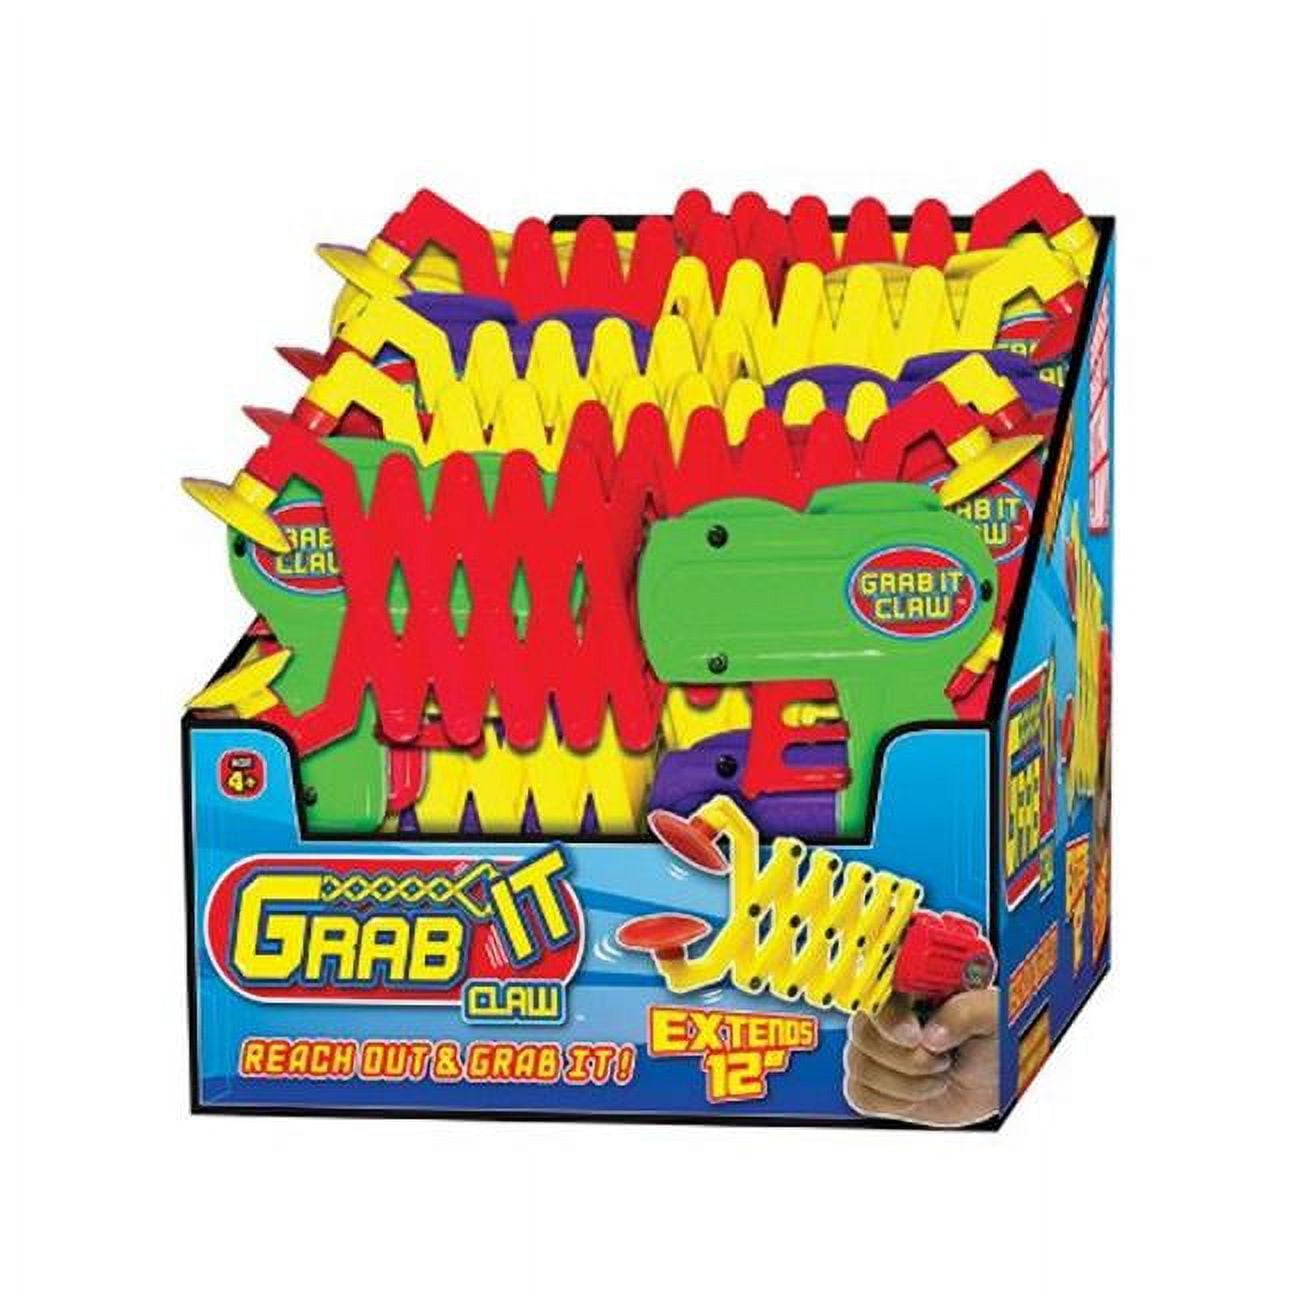  JA-RU Grab It 12 Inch Claw Grabber Toy (1 Grabber Toy). Plastic  Robot Claw Grabbing Toys for Kids. Hand Eye Coordination Learning Toy. Toy  Pickup Interactive Playtime Tool. Party Favor. 5617-1 